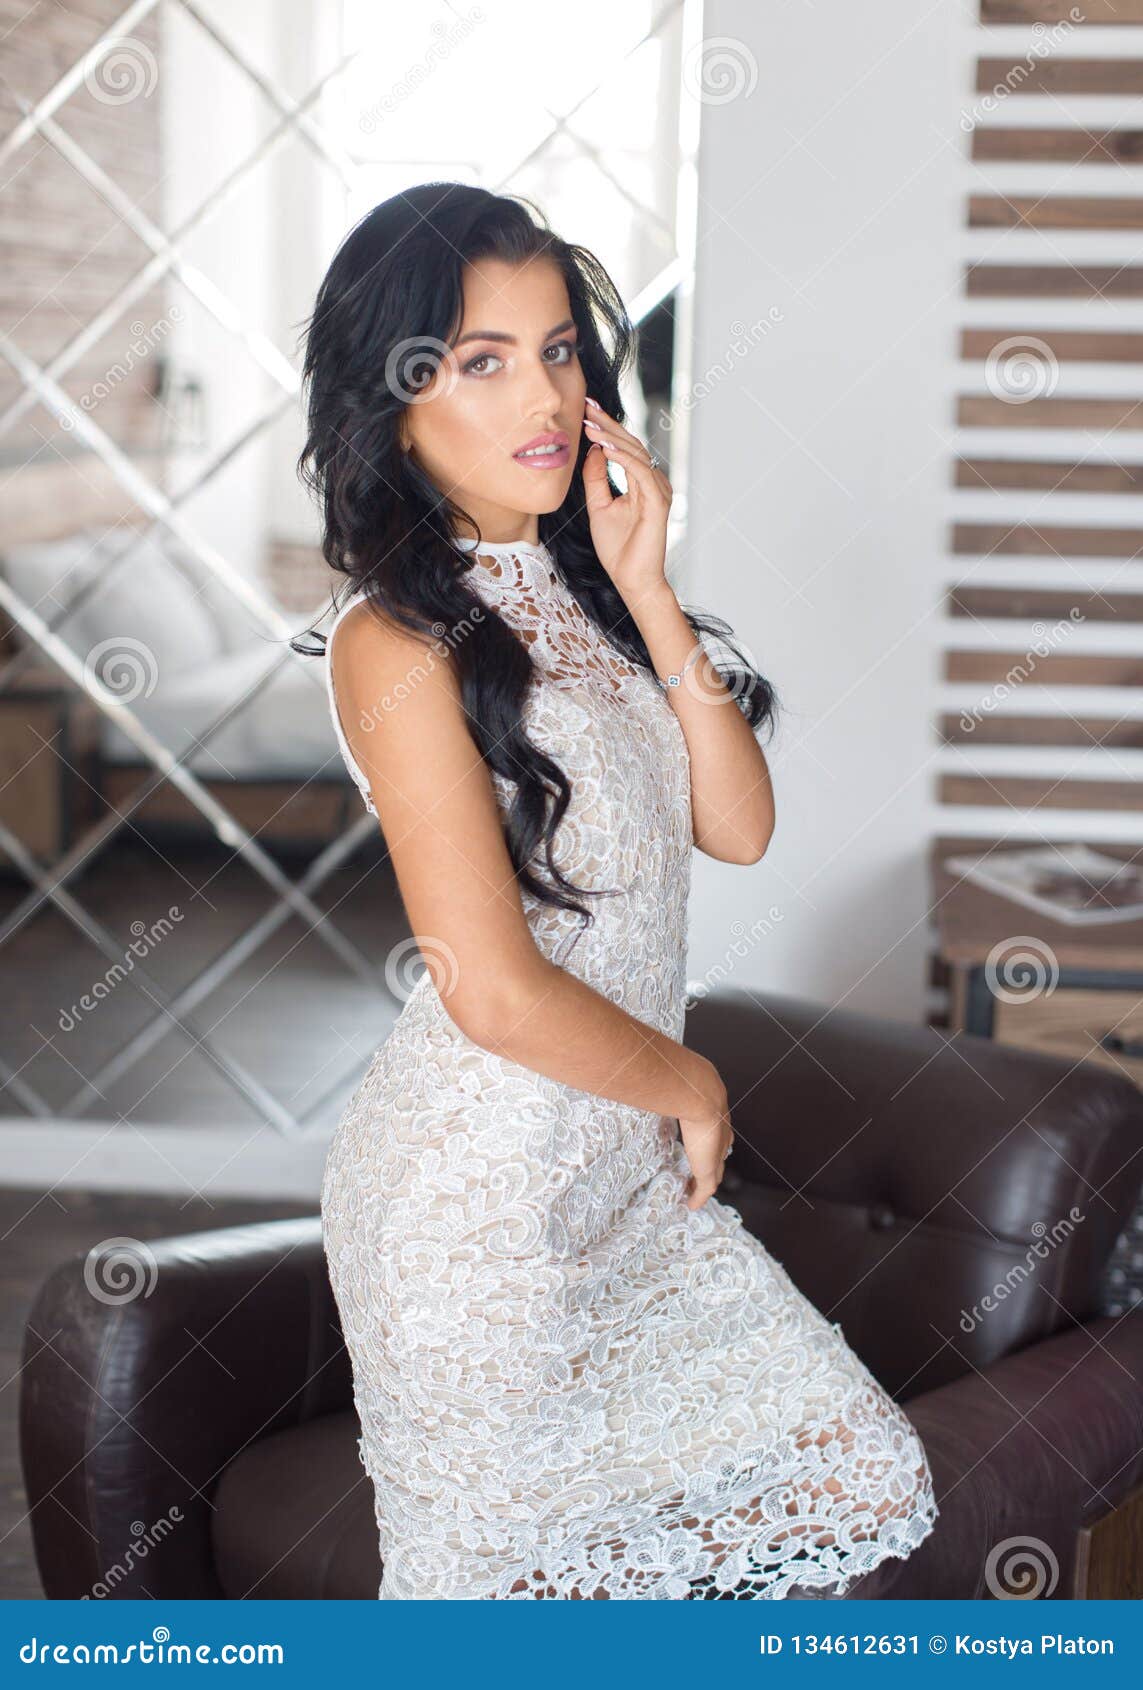 Beautiful Brunette In A White Dress In The Interior Stock Image Image Of Cute Person 134612631